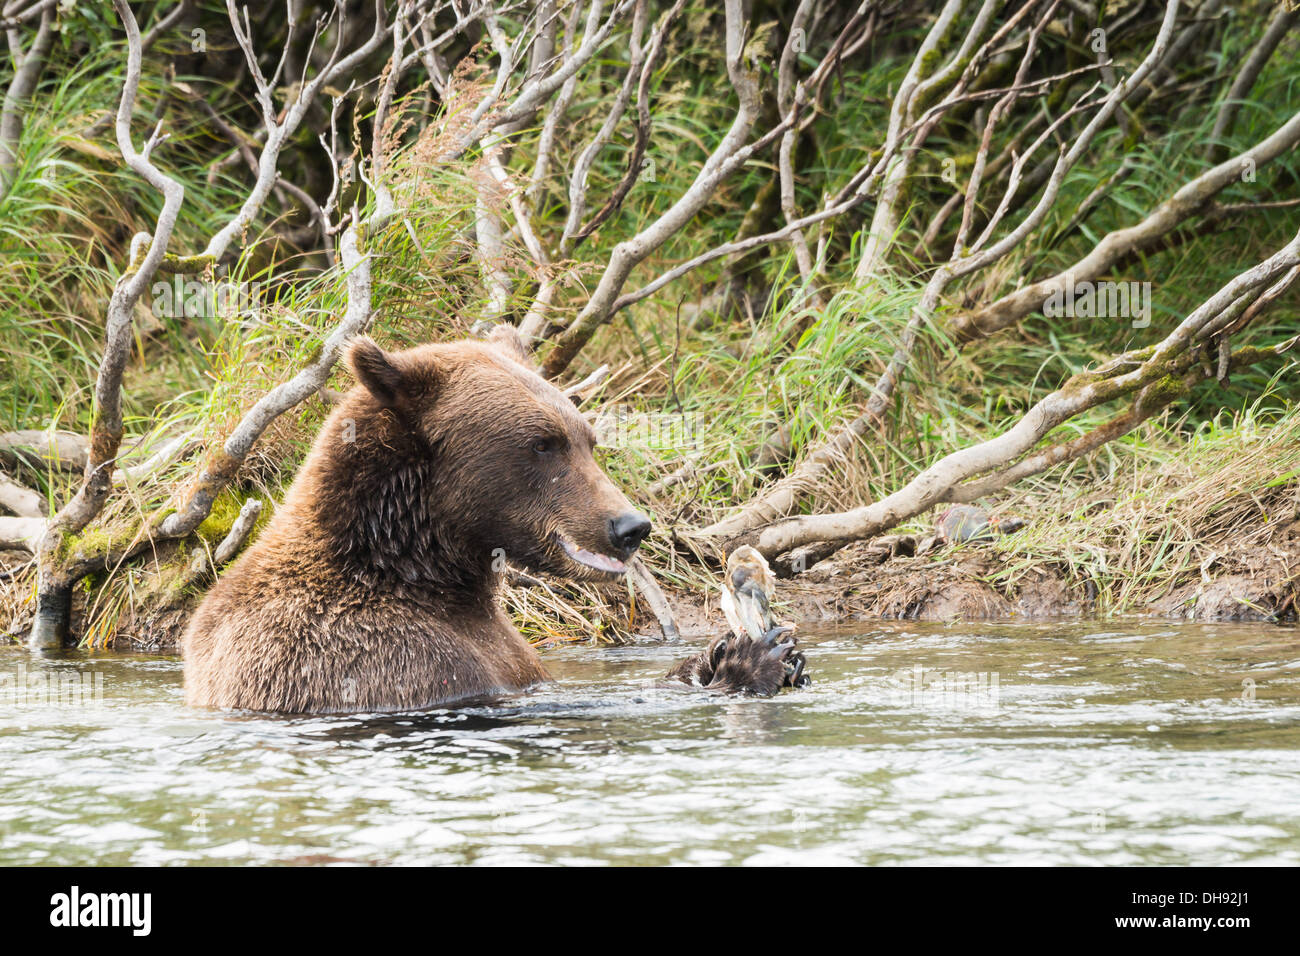 Grizzly bear (Ursus arctos gyas) seated in a river and eating Stock Photo